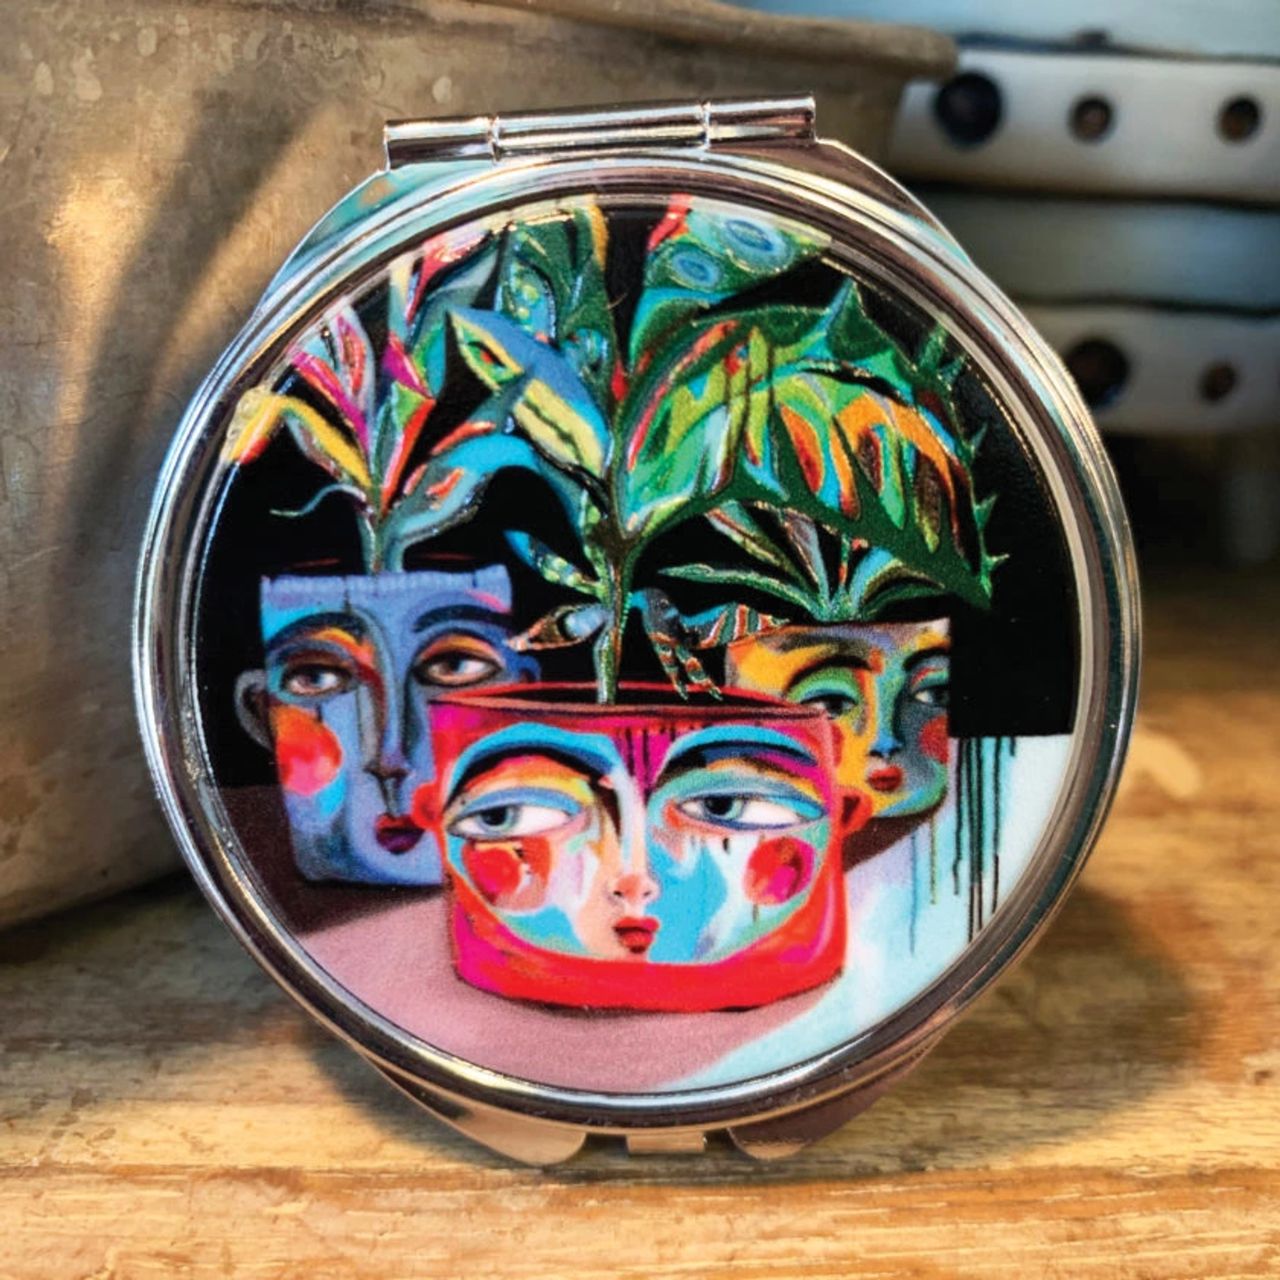 Michelle Allen Grow Boldy Trinket Box  This lightweight and durable Grow Boldly trinket box makes a splendid gift for a friend or yourself. They are the perfect size to fit in any purse, make-up bag, carry on, or backpack. And best of all, they are super practical for every day use.